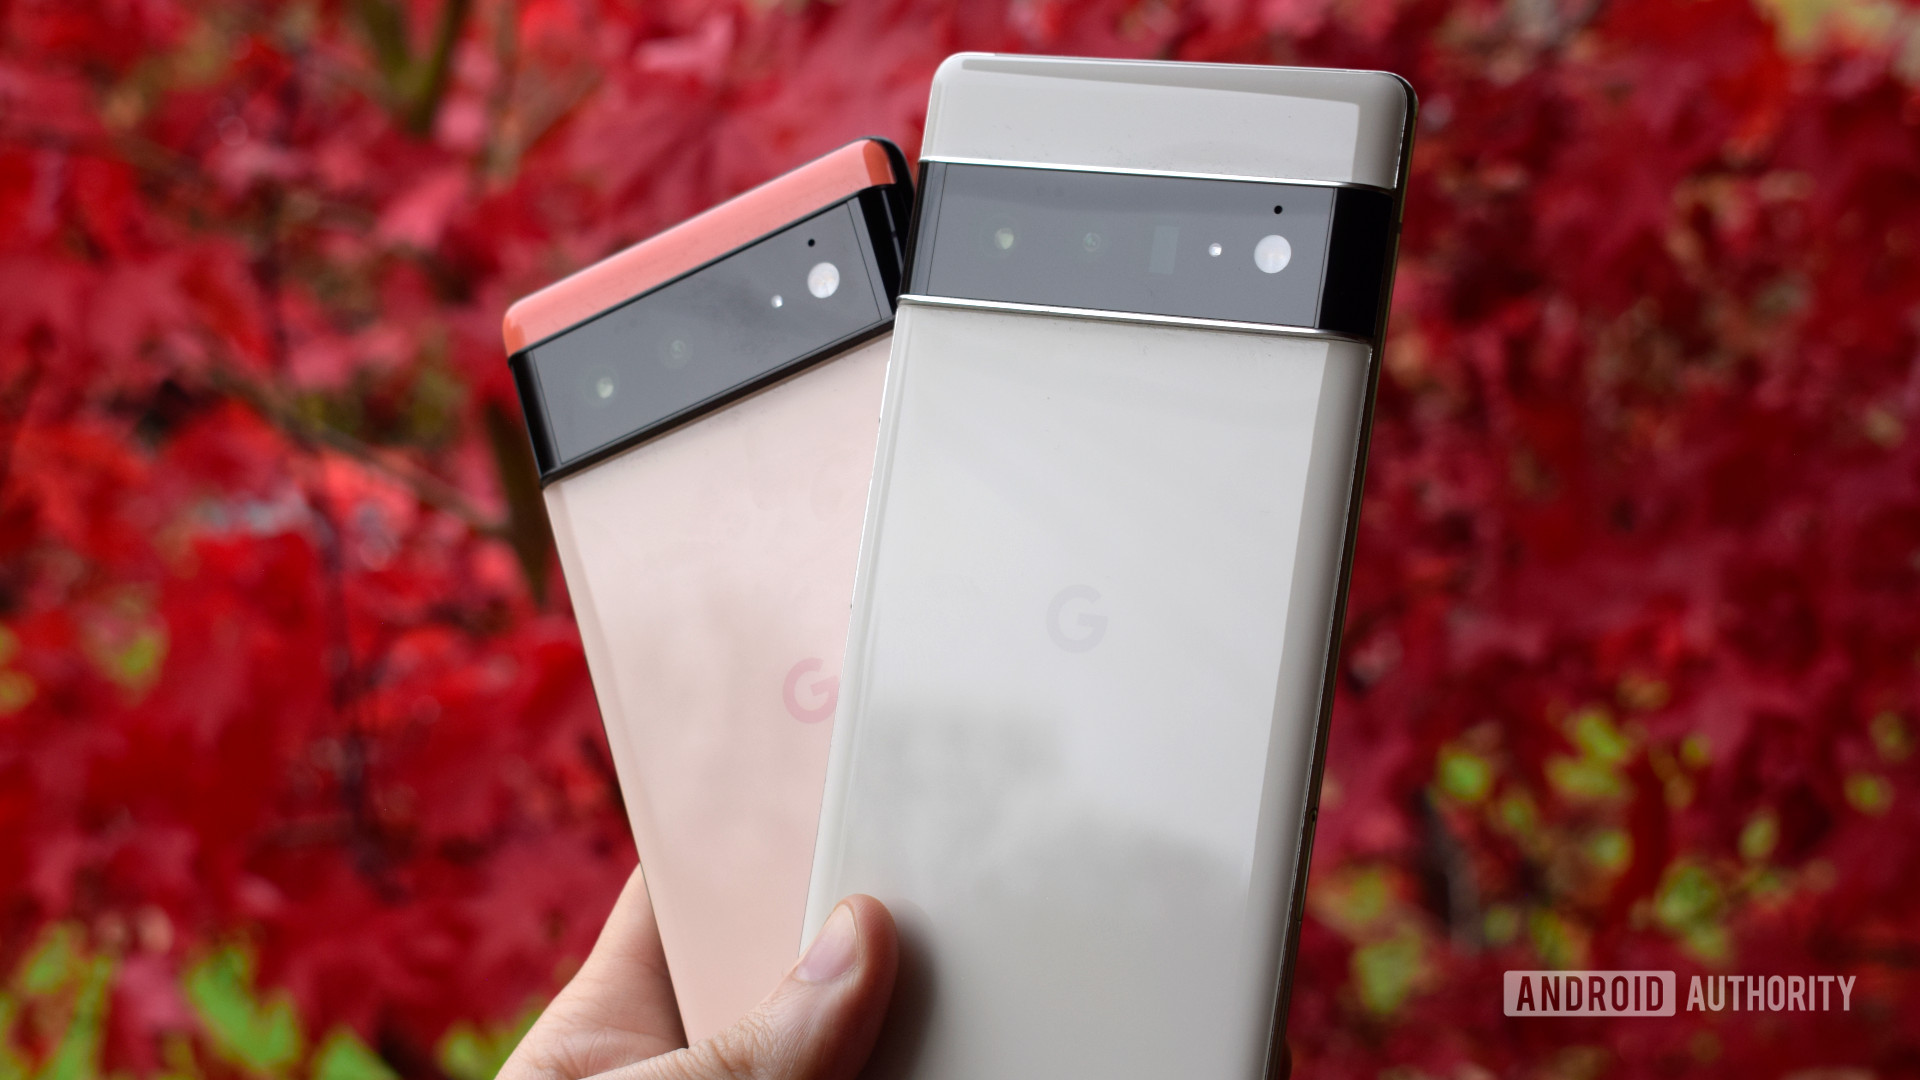 Google Pixel 6 and Pixel 6 Pro on red leaf background - The best waterproof phones